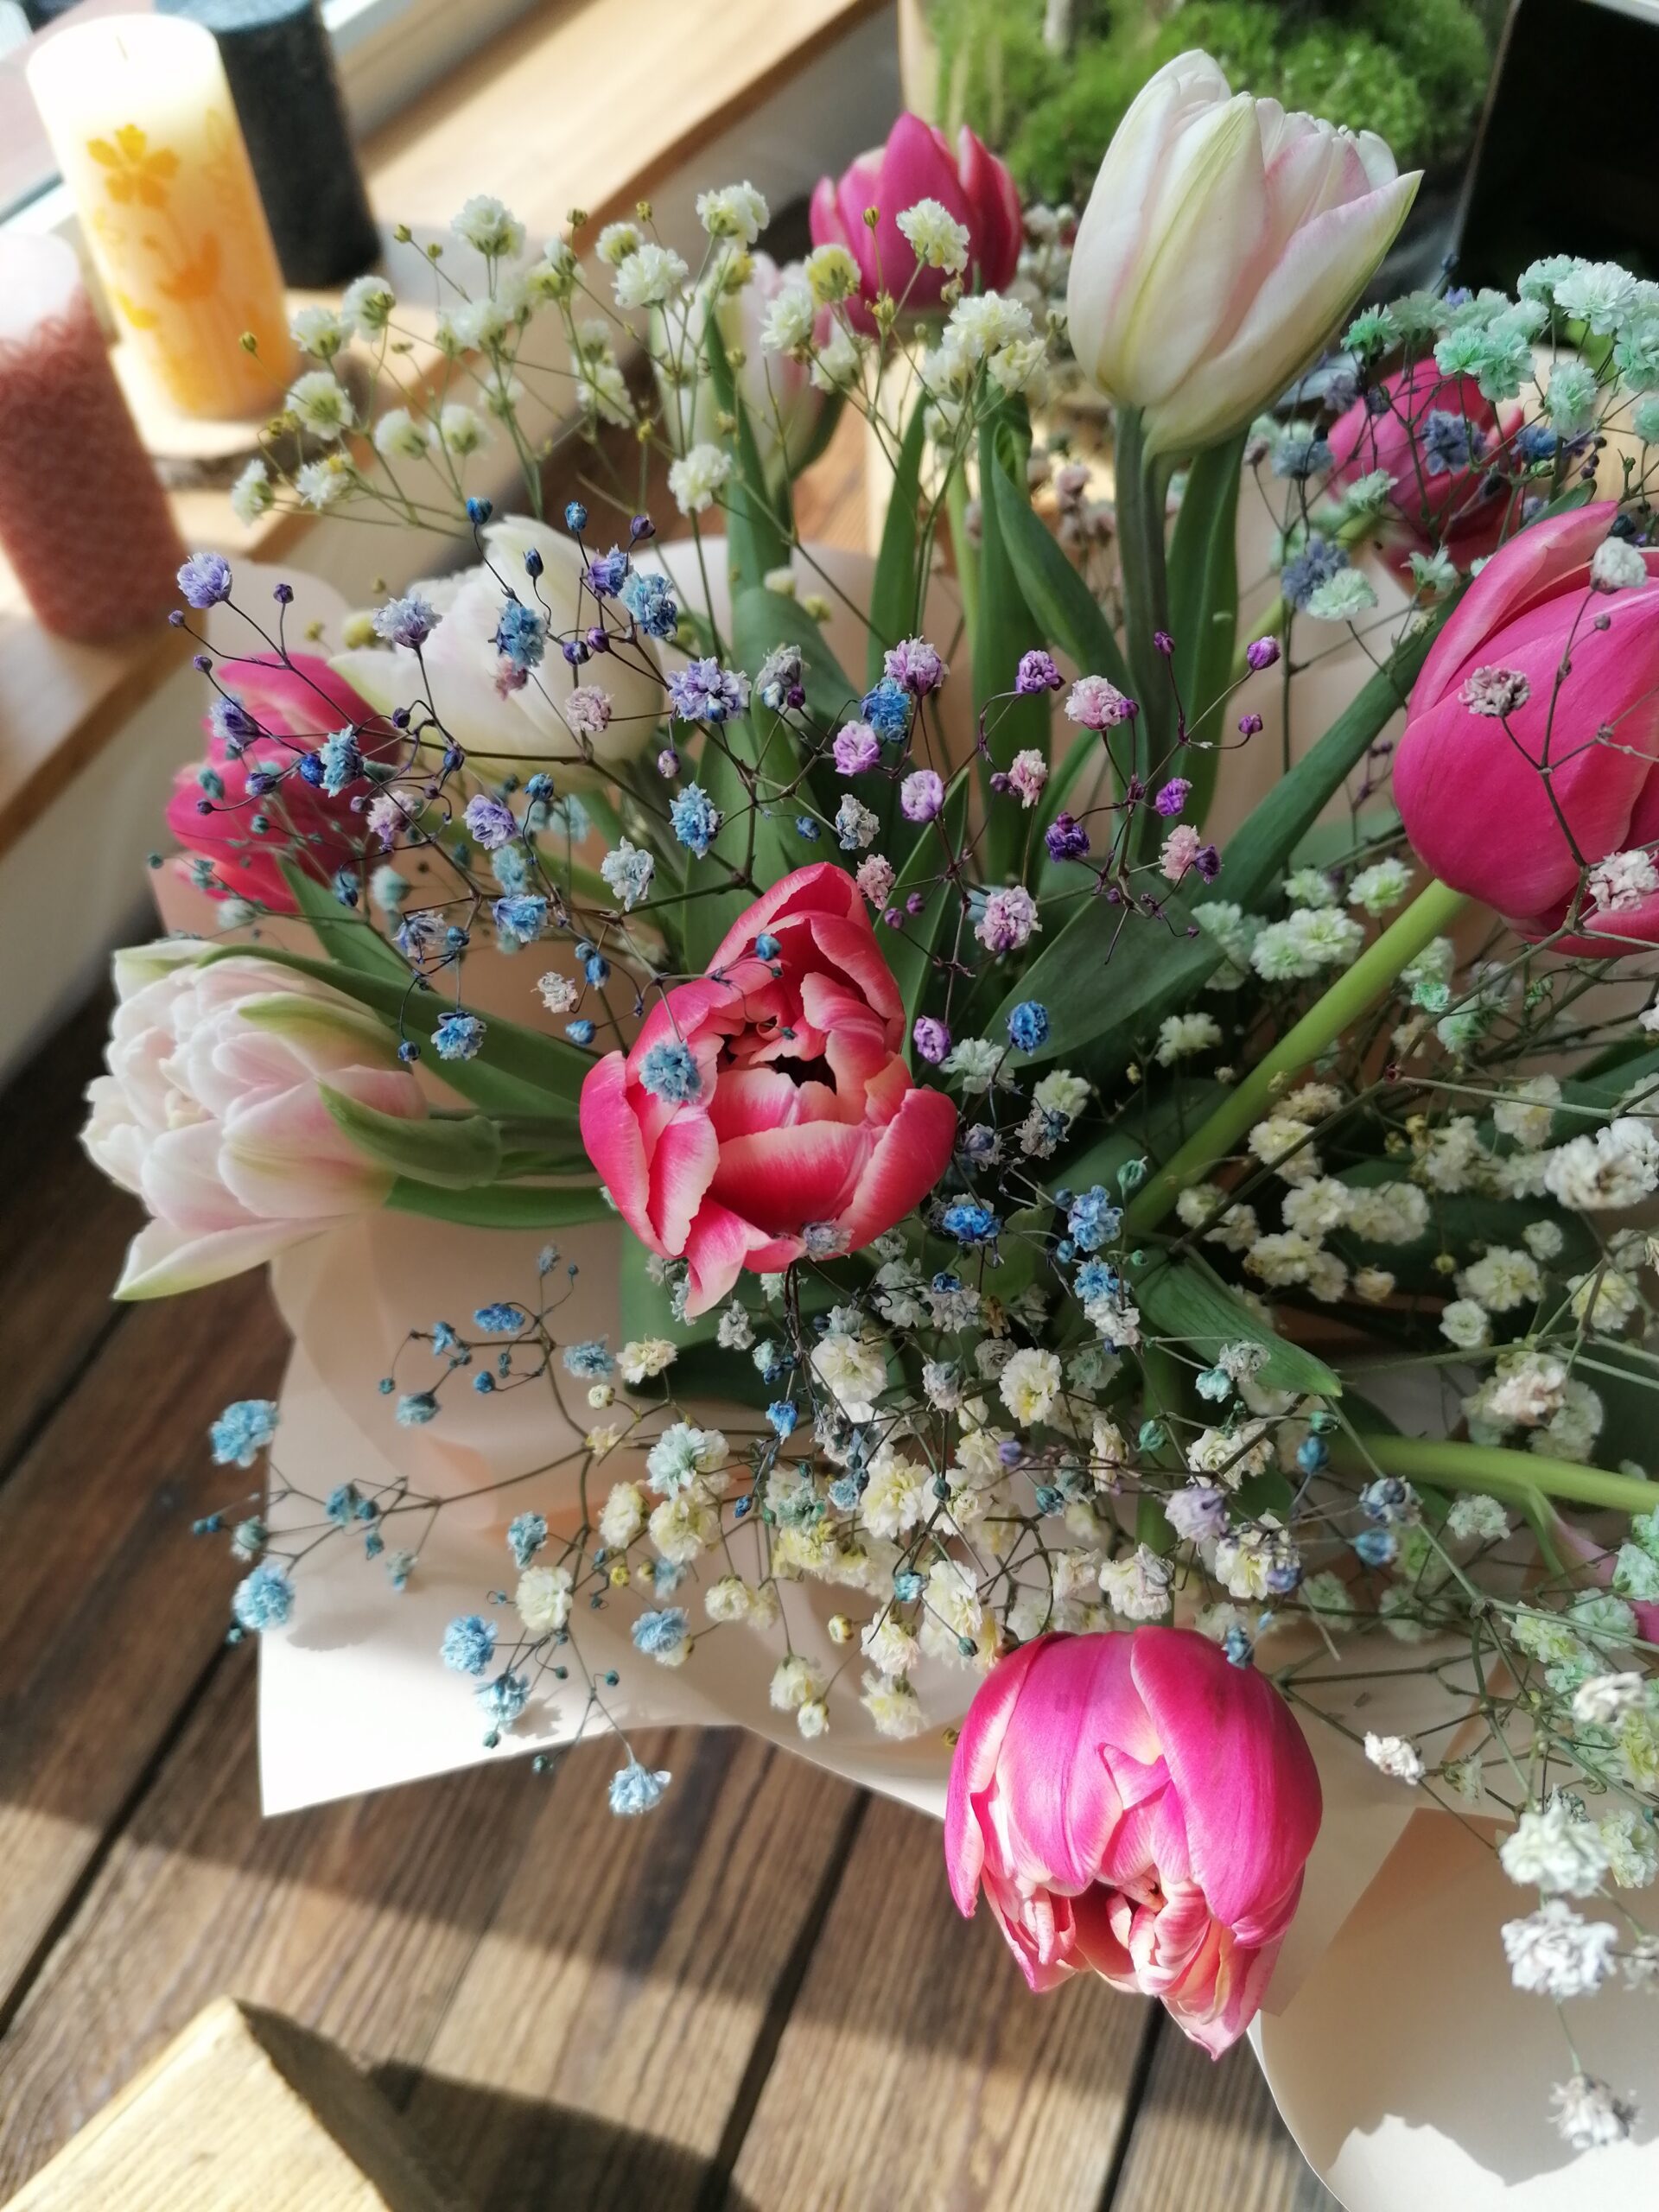 Spring tulips and rainbow gypsophila - that's joy, excitement, enthusiasm all in one!